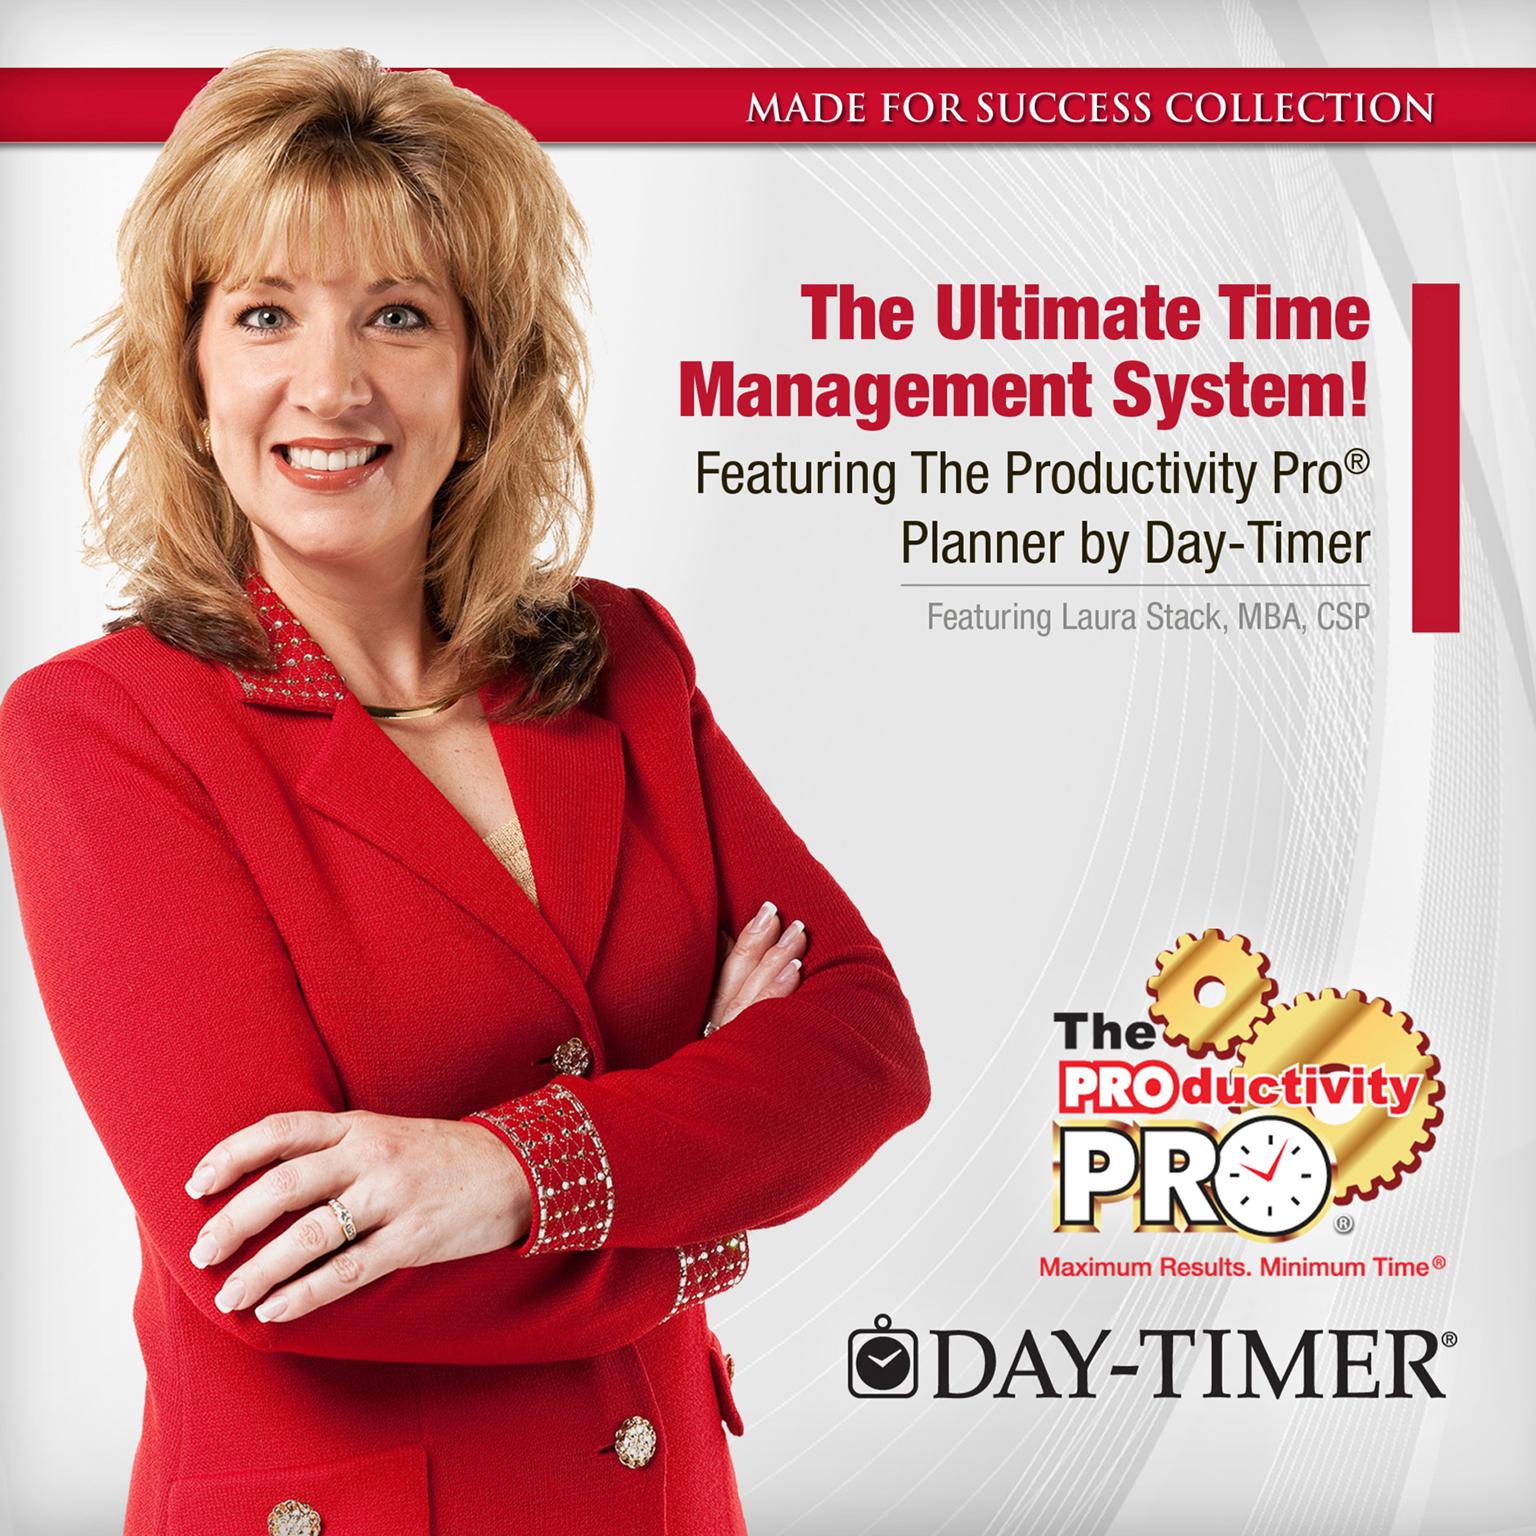 The Ultimate Time Management System!: Featuring The Productivity Pro® Planner by Day-Timer Audiobook, by Made for Success